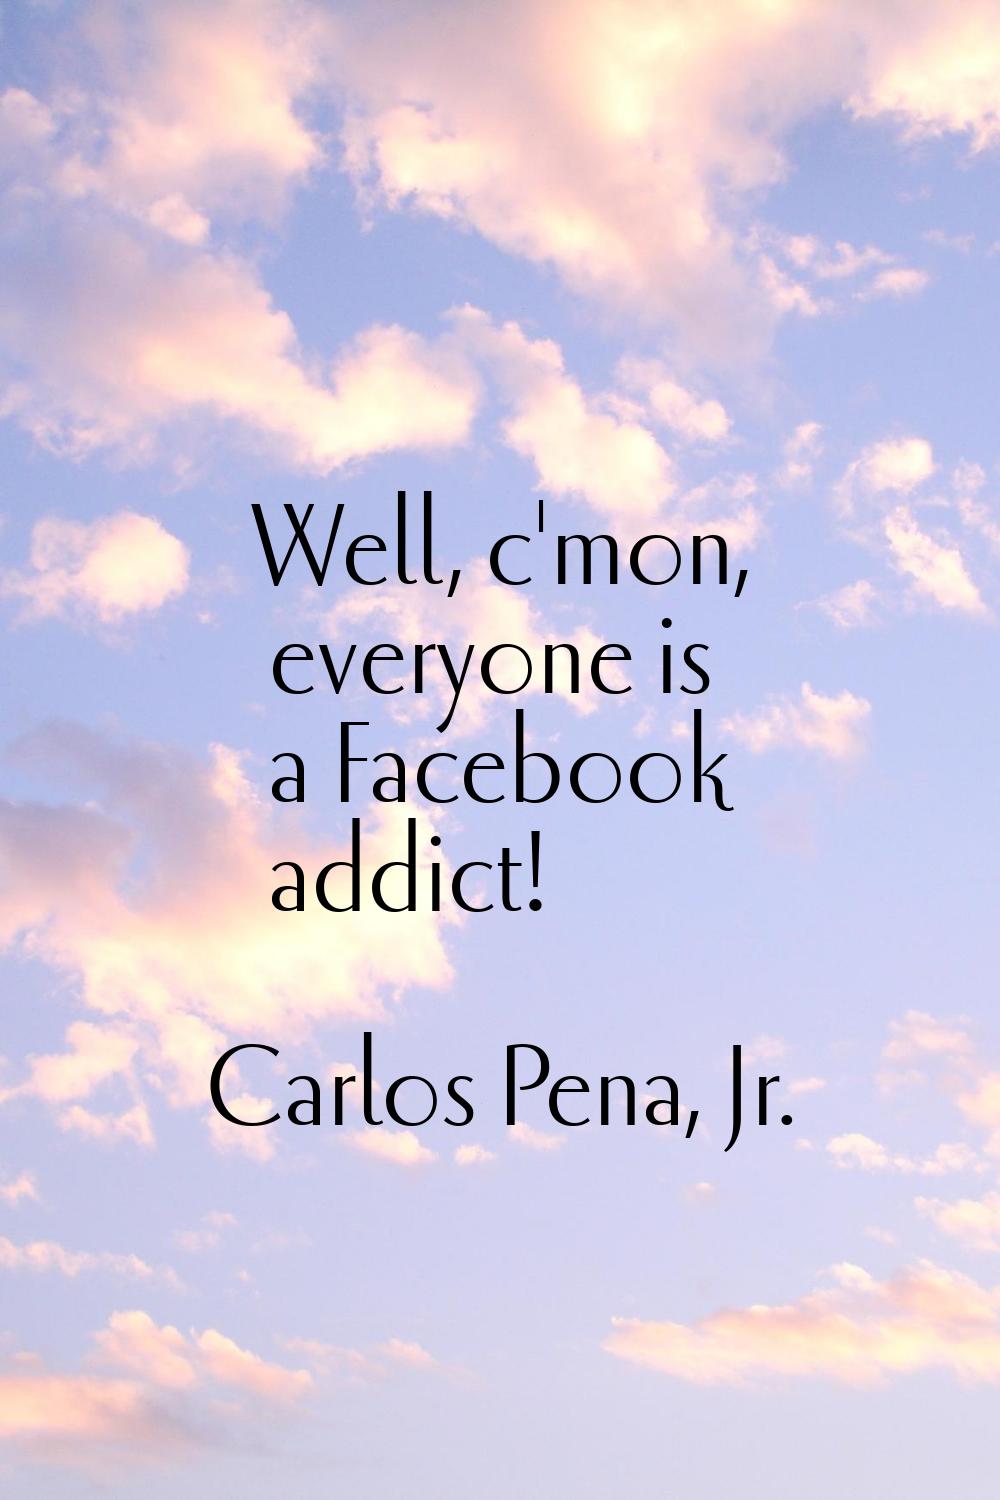 Well, c'mon, everyone is a Facebook addict!